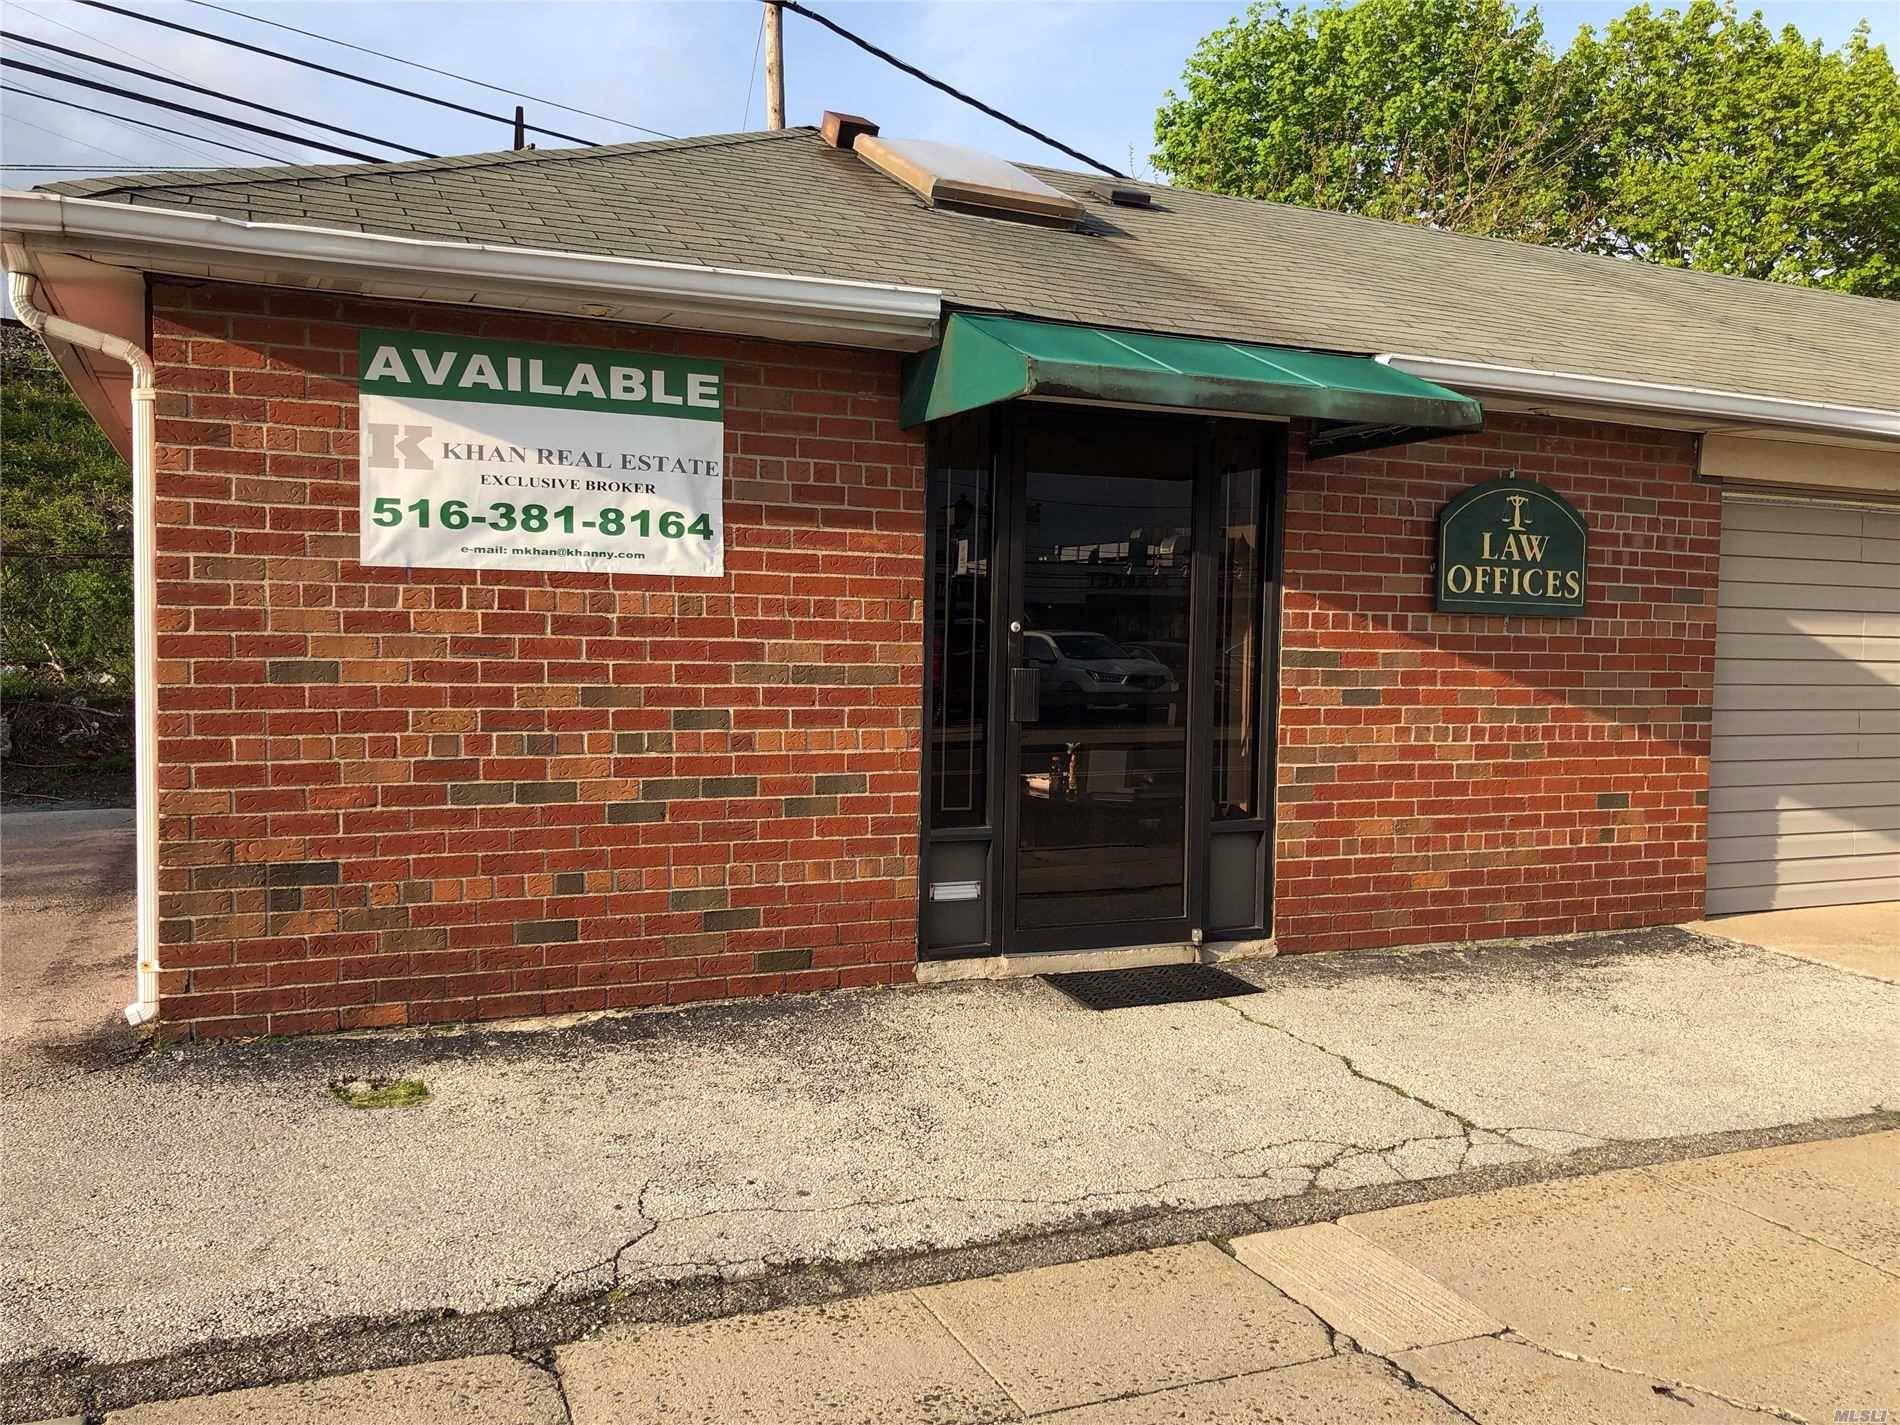 80 Feet x 20 Feet Office Space on Busy Woodbine Court in Village of Floral Park.